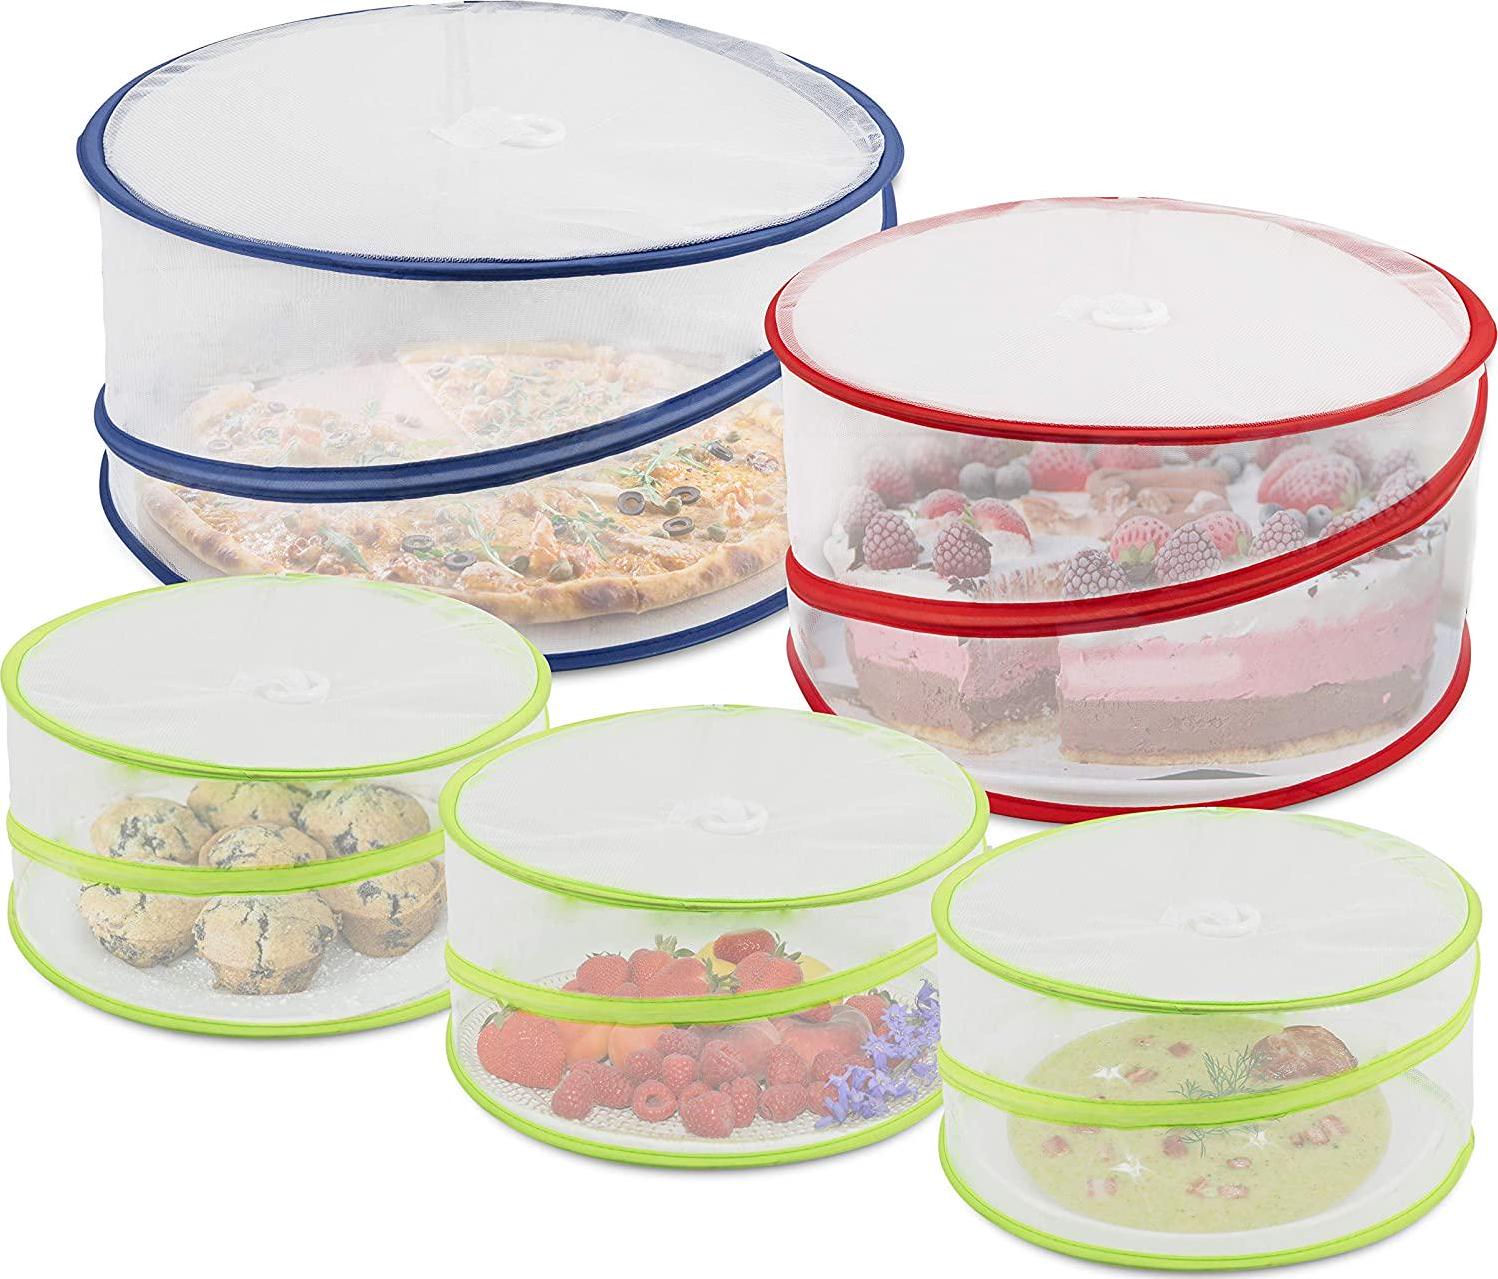 Lords of London, Lords of London - Set of 5 Reusable Mesh Screen Pop up Food Tent Storage Covers, 3 Size, for Large Platters, Plates and Bowls - Protecting Food and Beverages from Bugs and Insects - Fine Net Design